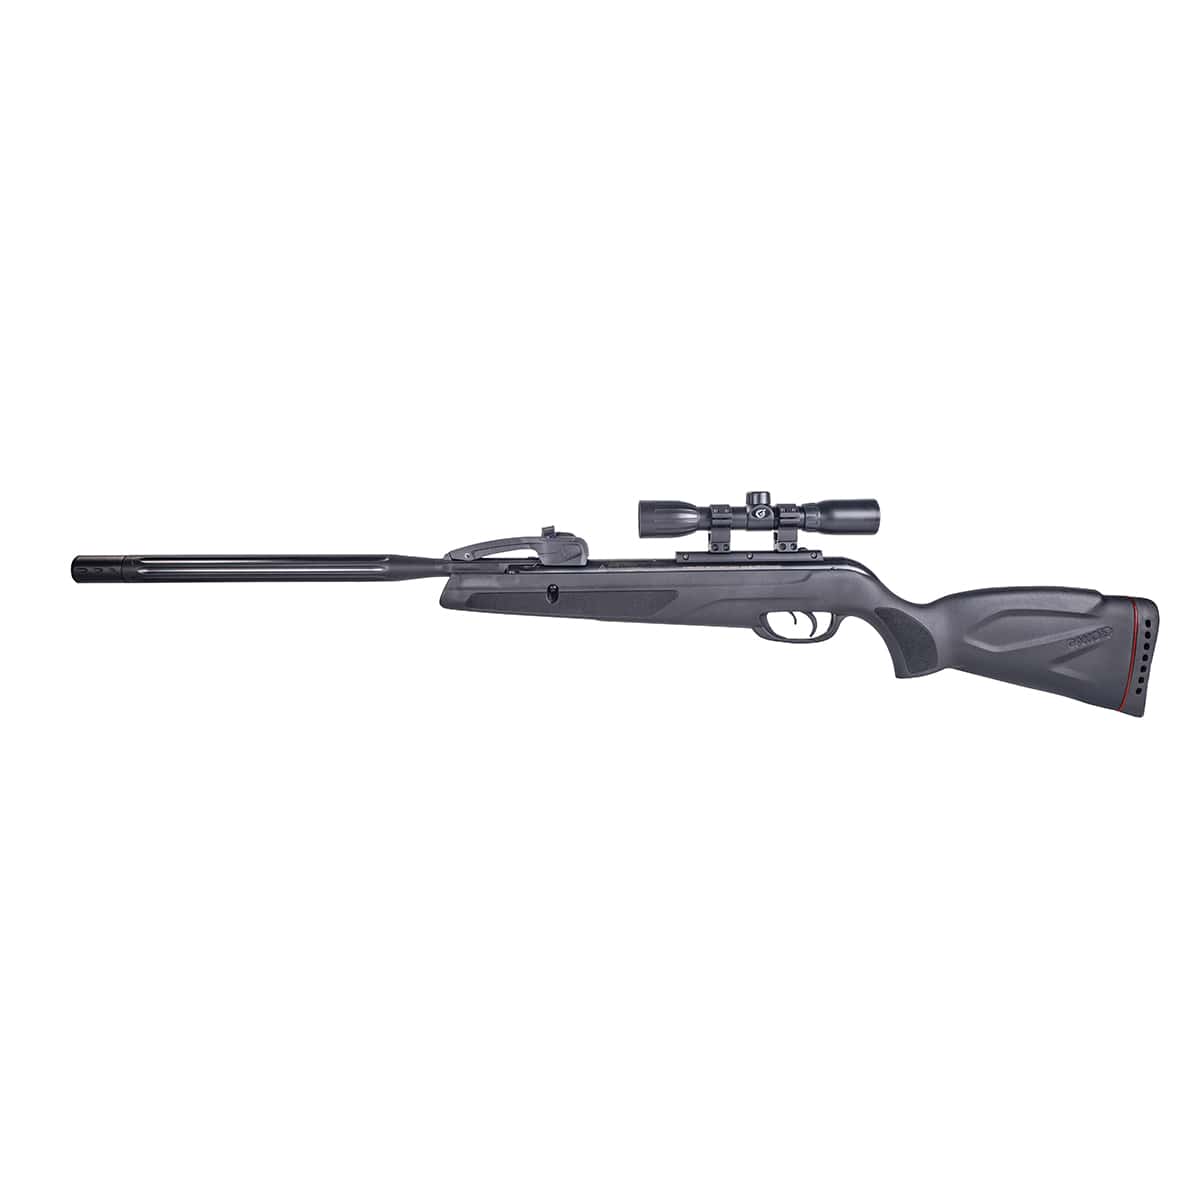 Gamo Swarm Whisper .177cal Igt Powered Pellet Air Rifle With Scope